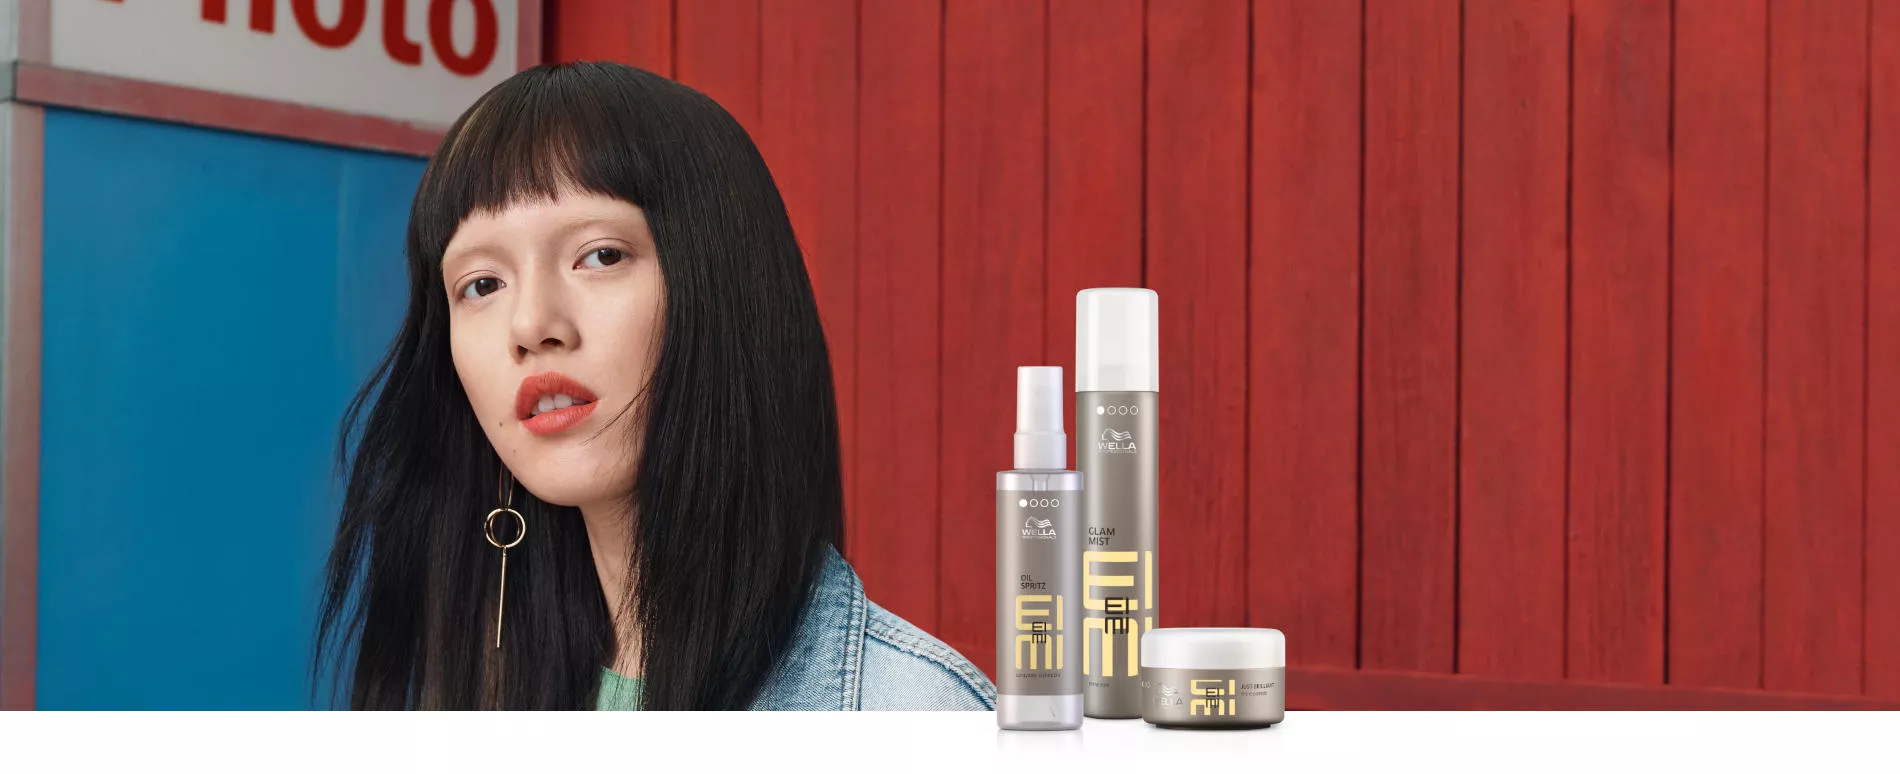 Headshot of a female model with long, straight, black hair, plus 2 silver bottles and 1 pot of EIMI styling products